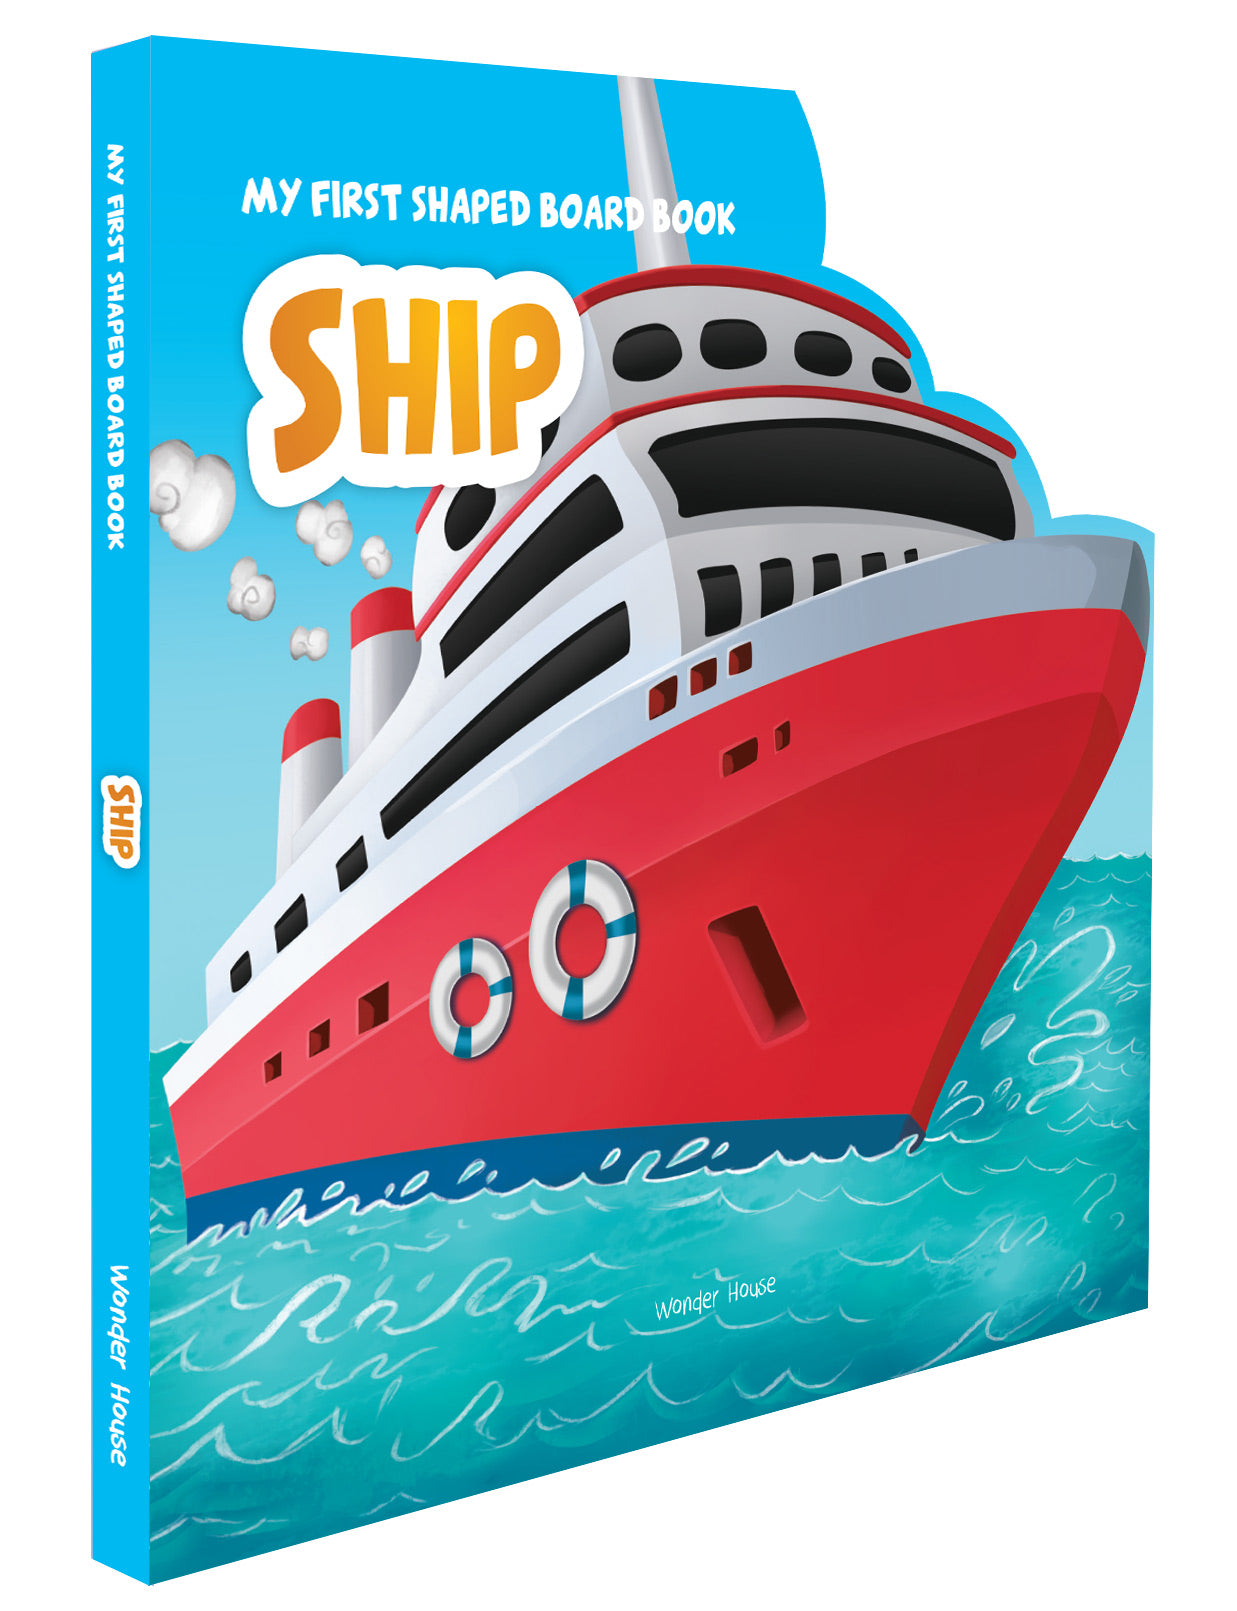 My First Shaped Board Books For Children: Transport - Ship